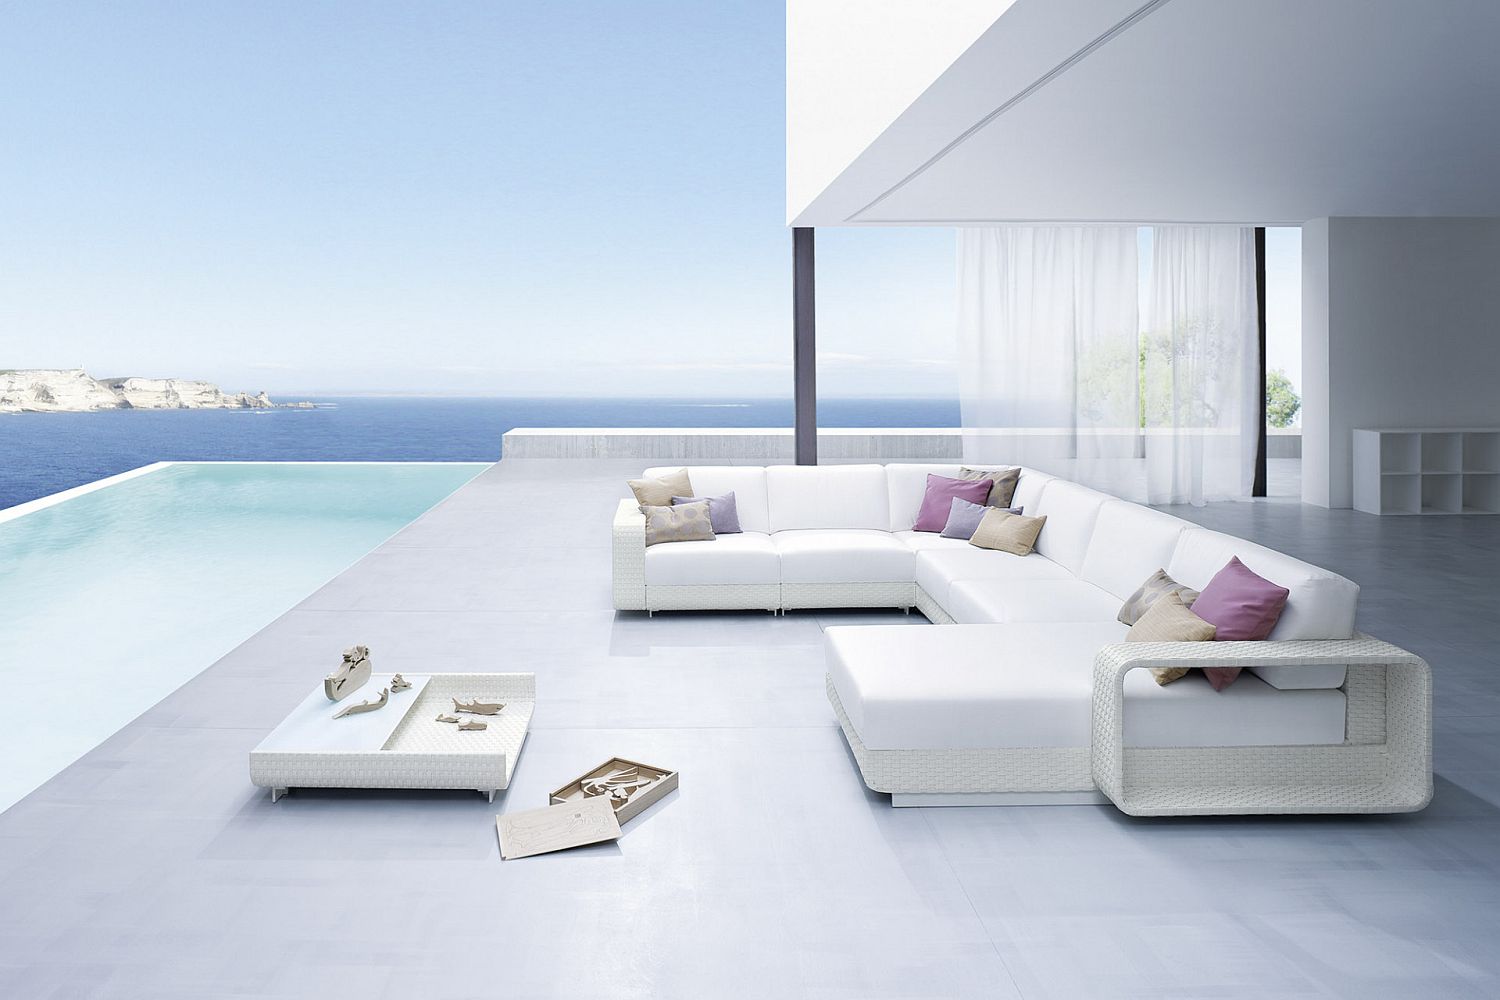 Poolside deck with the Hamptons outdoor sofa, armchairs and coffee table